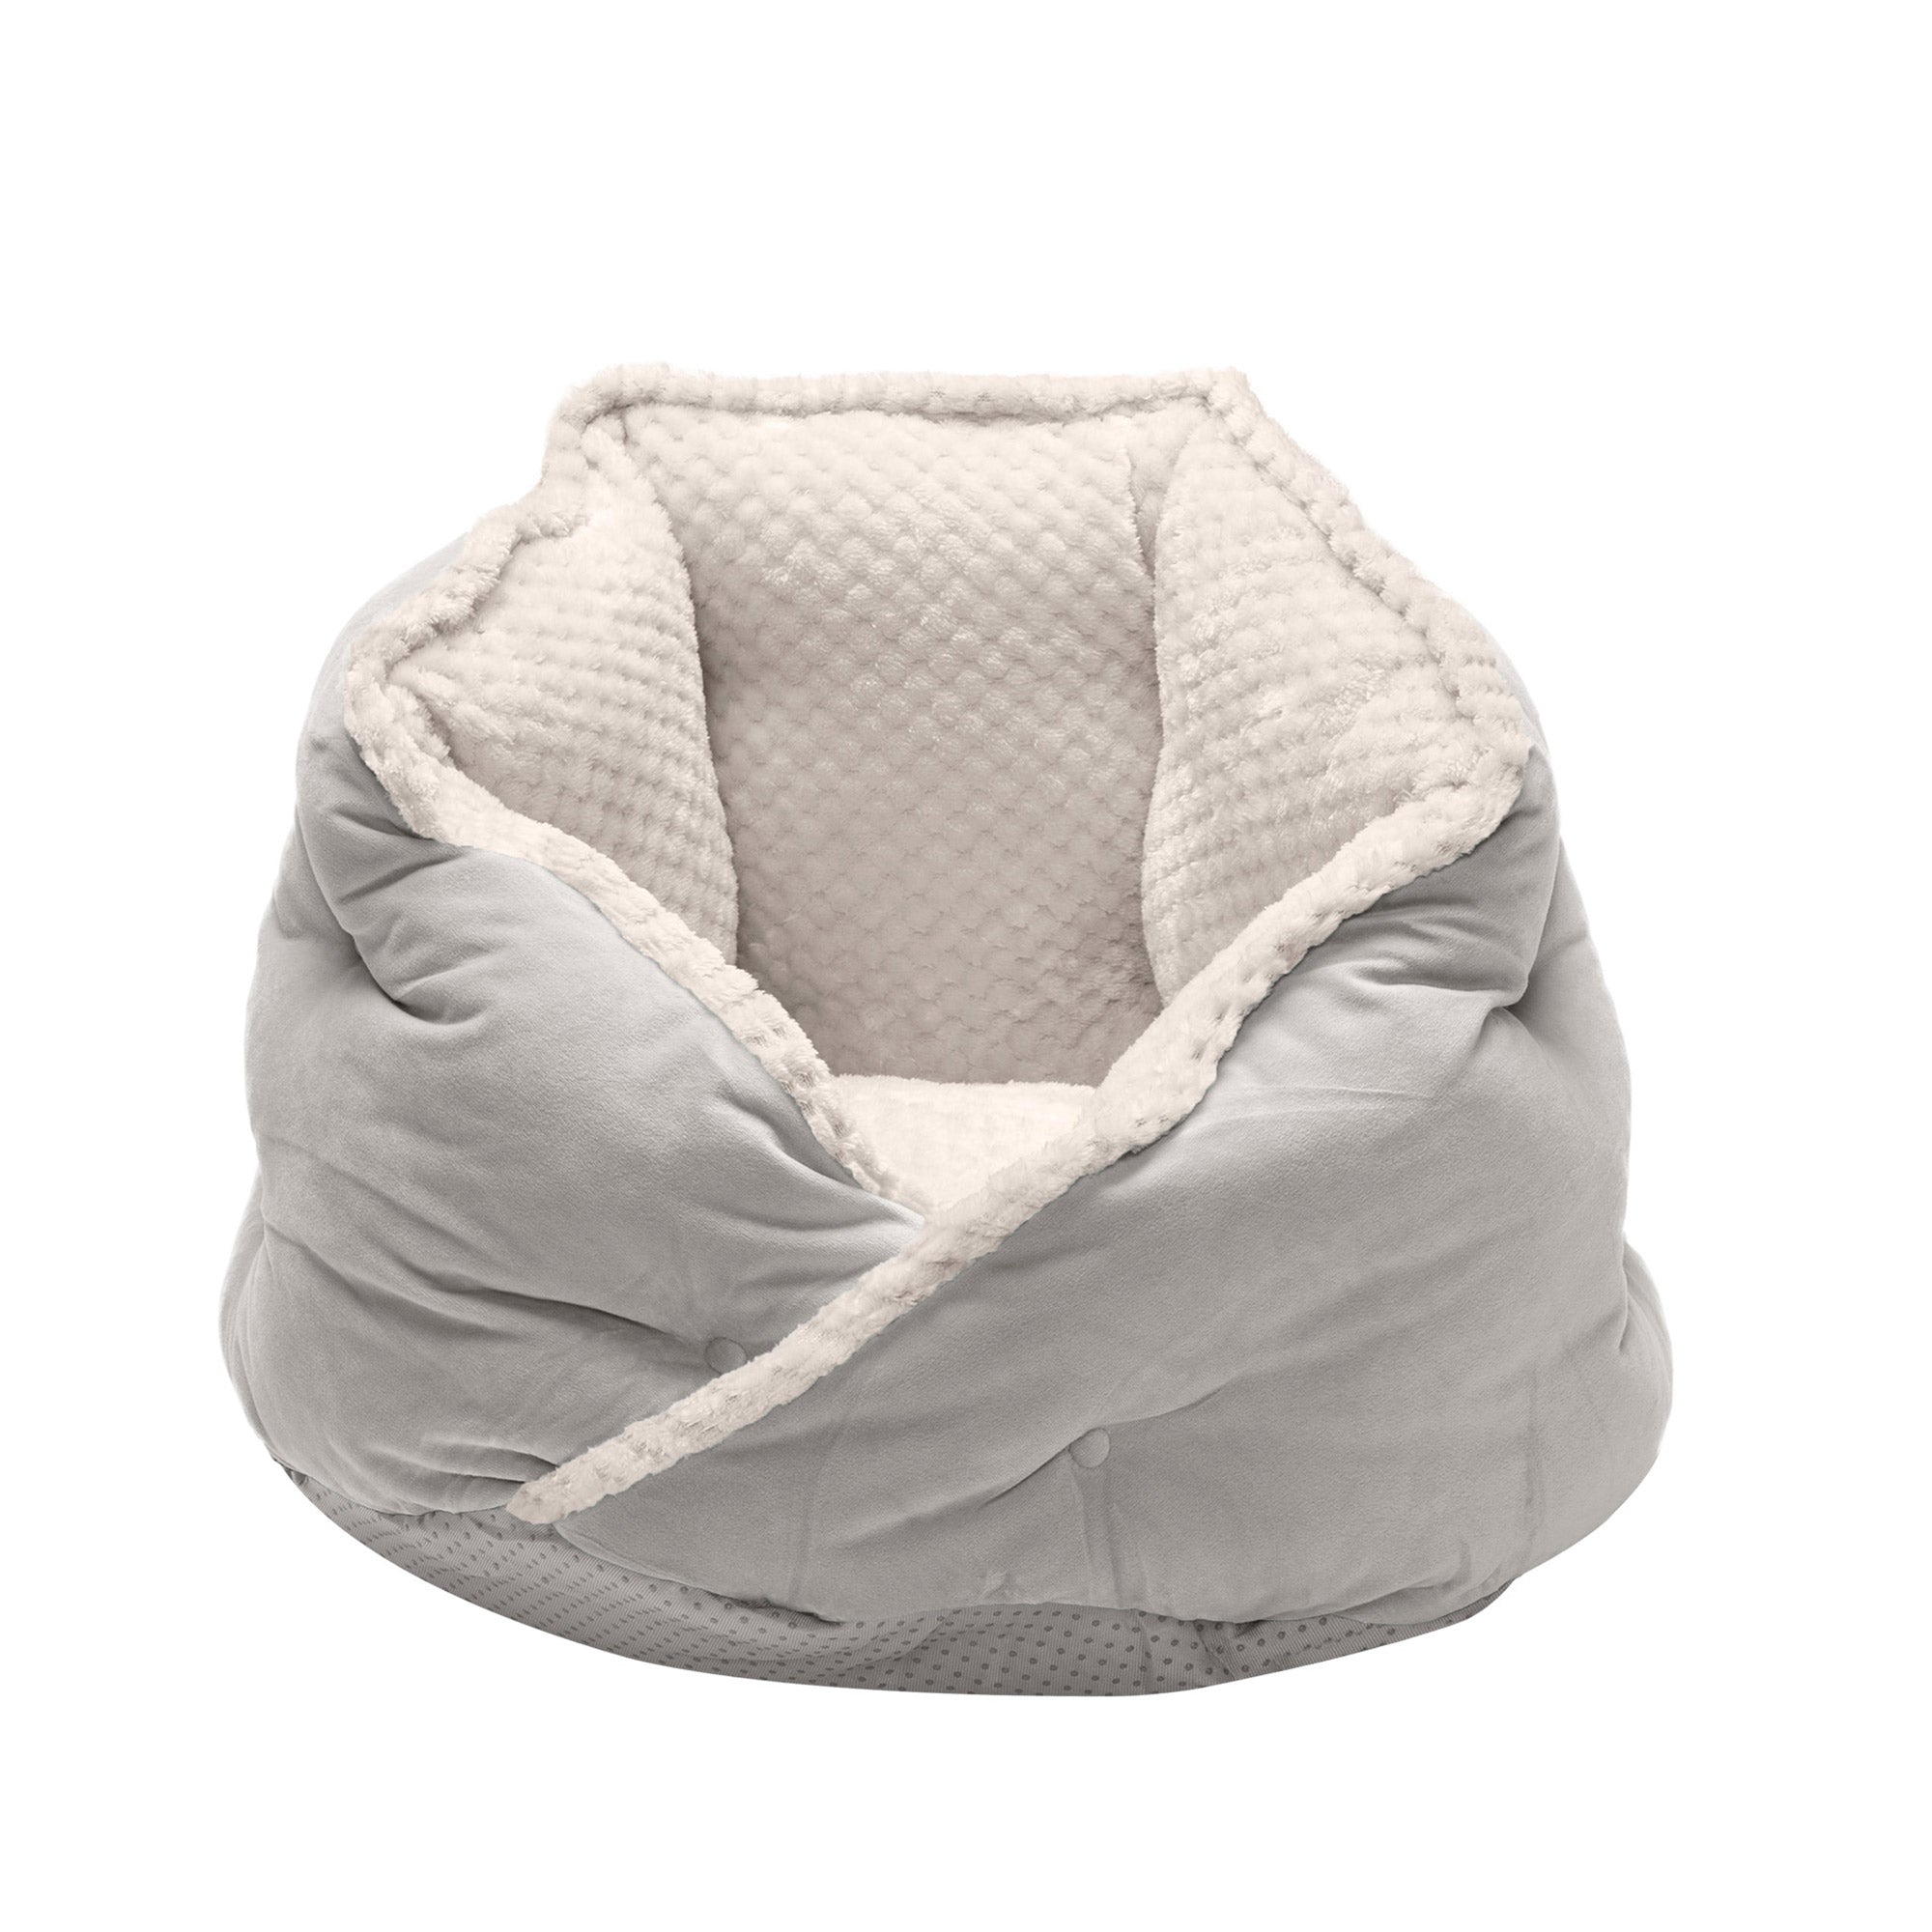 FurHaven | Minky Faux Fur and Velvet Hug Bed for Dogs and Cats， Silver Gray， Small/Toy/Teacup